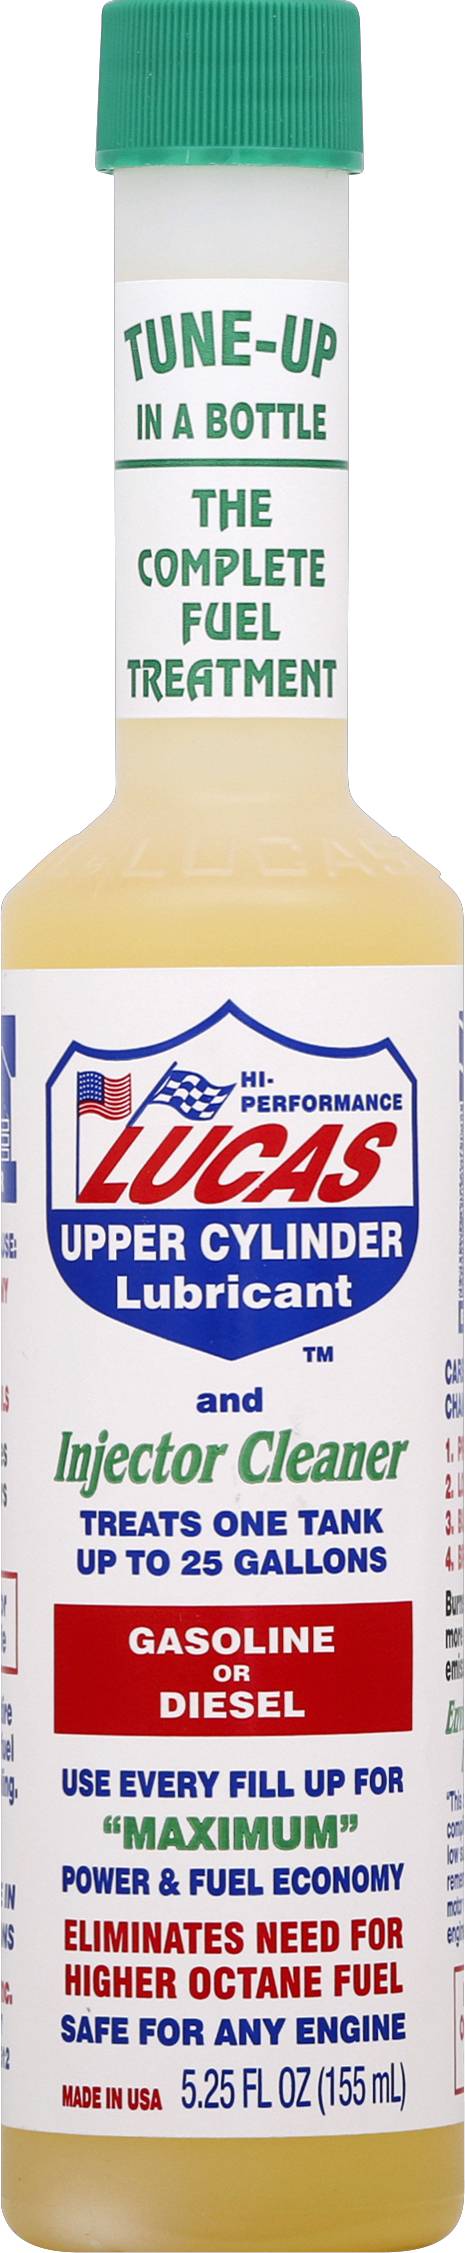 Lucas Upper Cylinder Lubricant and Injector Cleaner (5.3 fl oz)